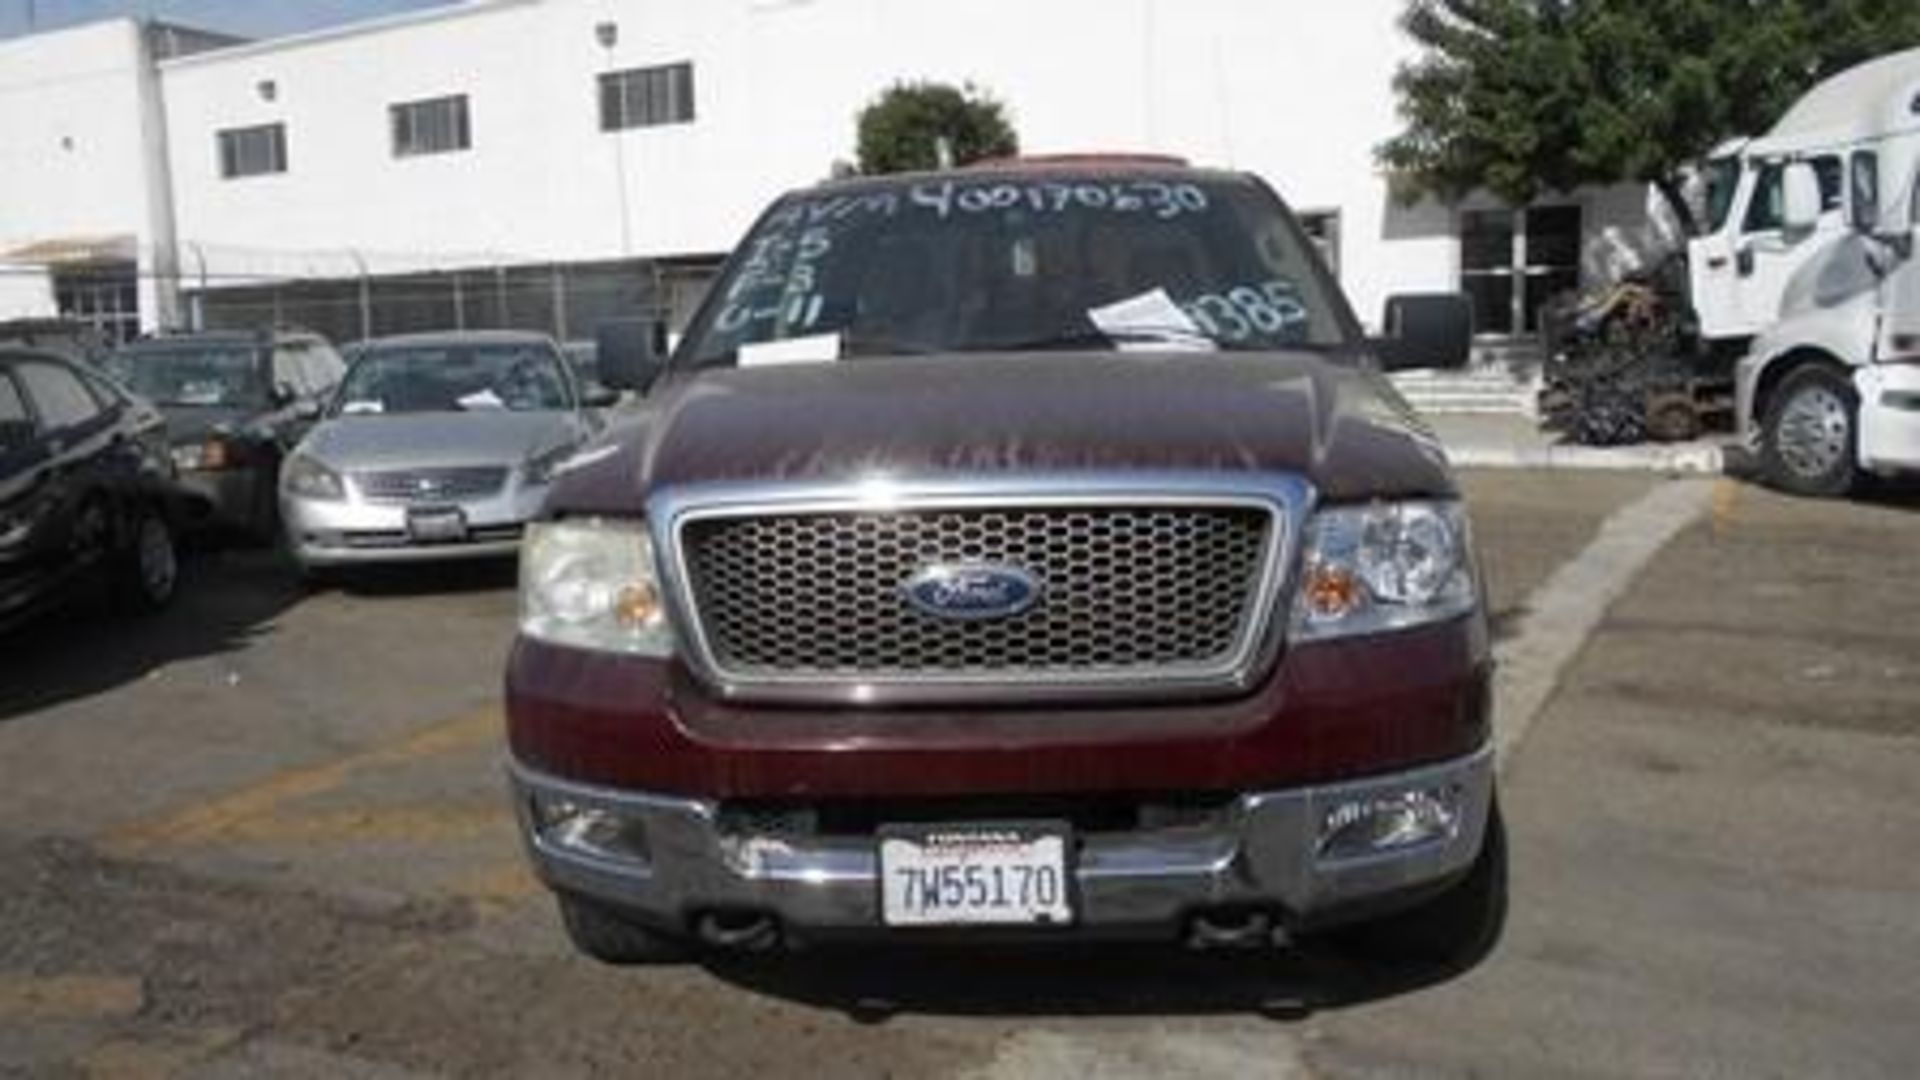 Vehículo Marca: Ford F150, Tipo: Pick Up, Modelo: 2005, Located In: Baja California, Deposit Of: $